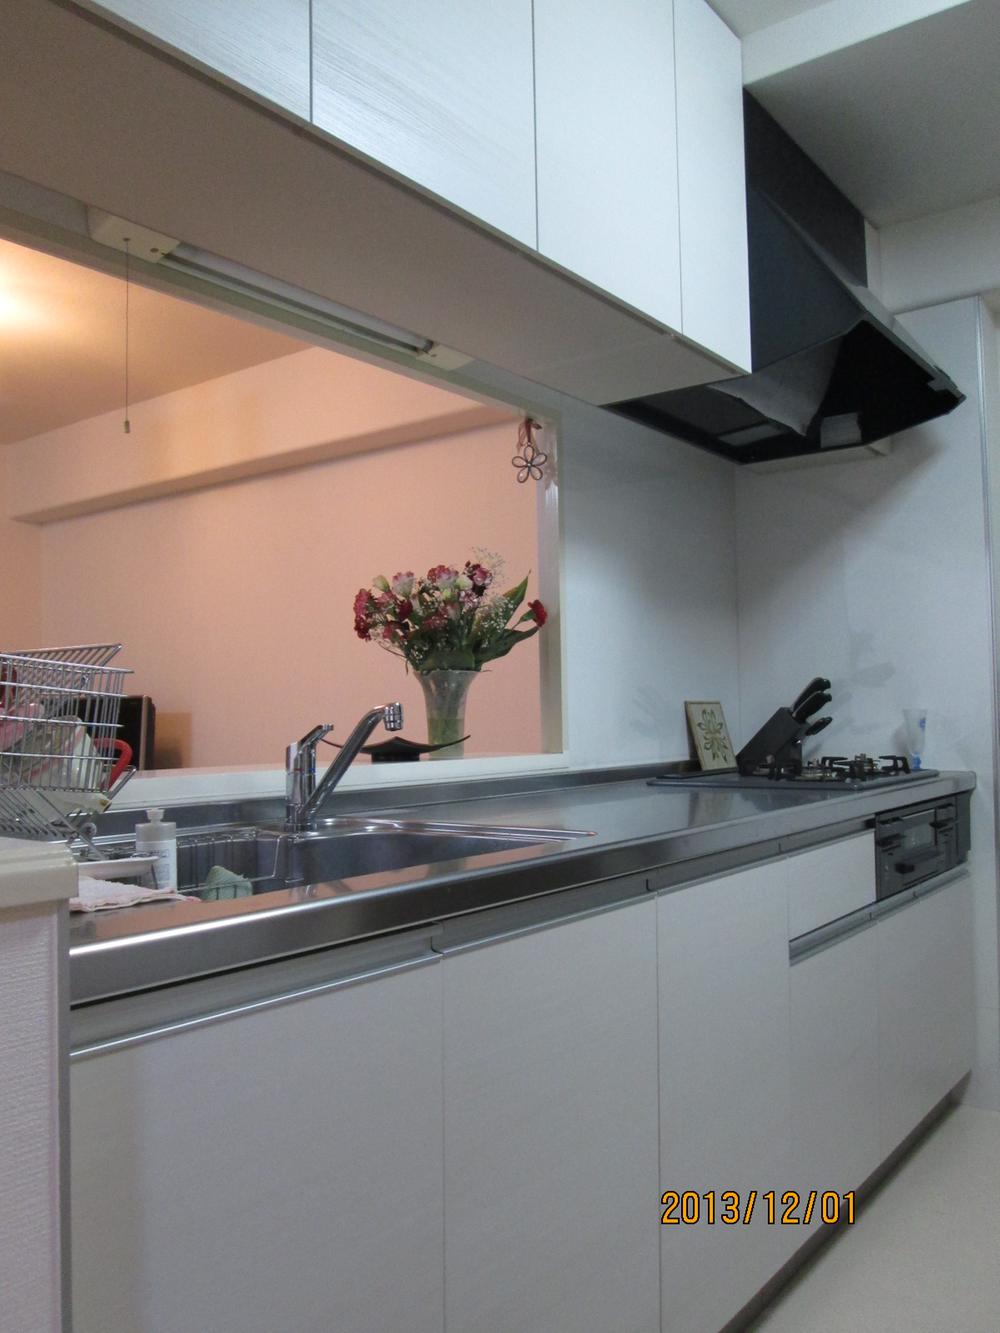 Kitchen. It is a kitchen with a feeling of cleanliness in which the white tones!